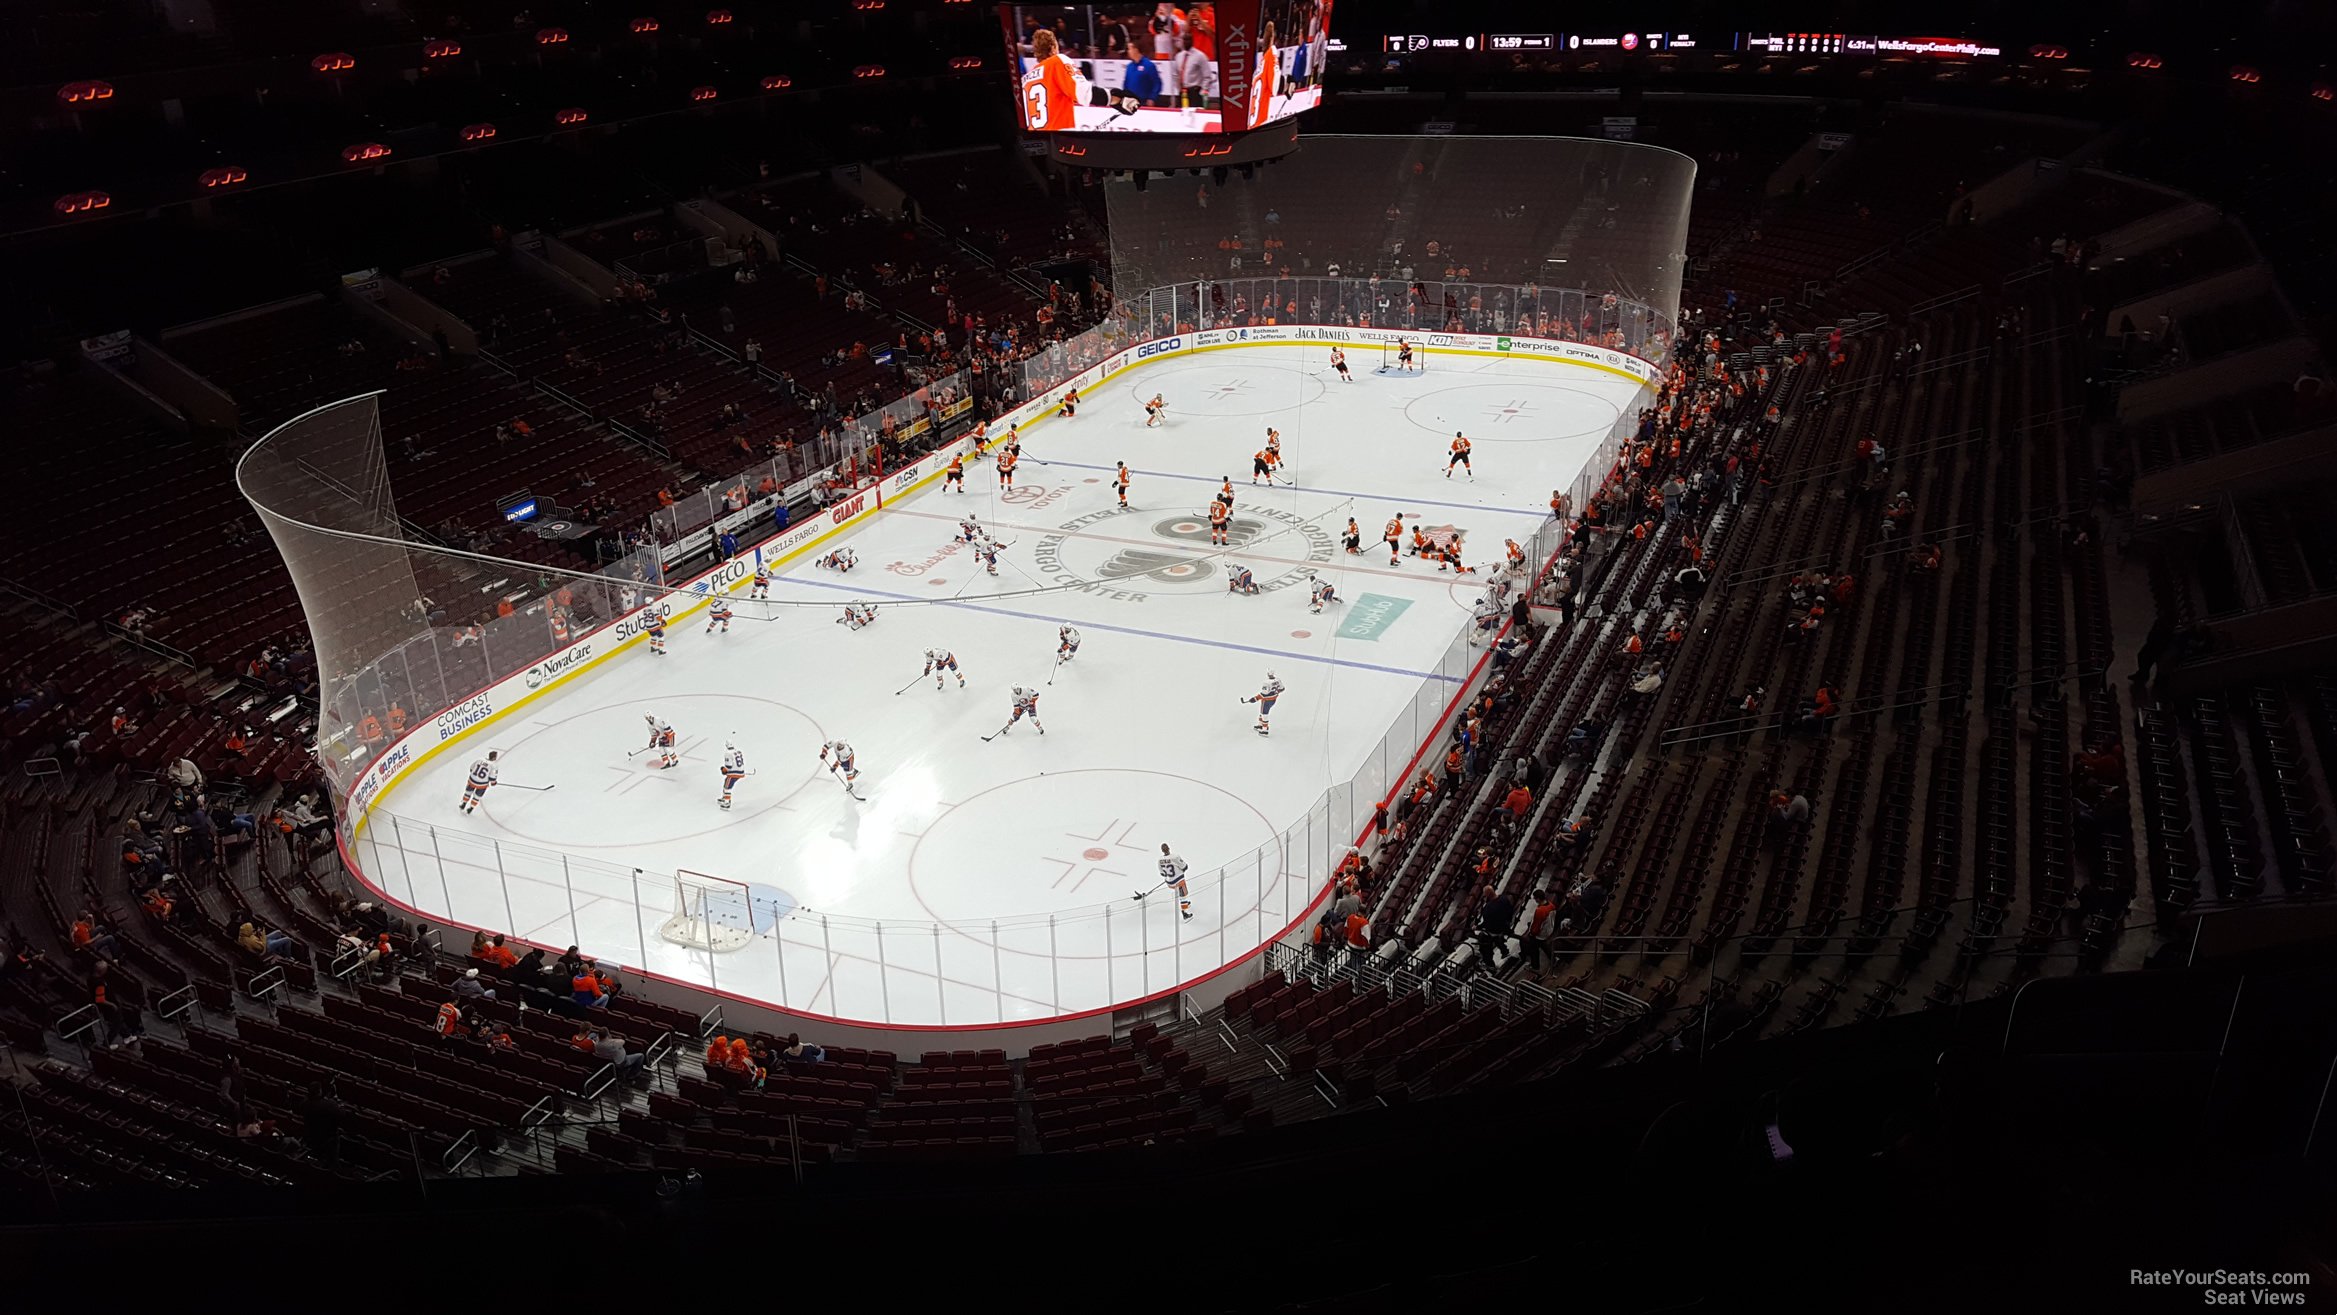 section 209, row 8 seat view  for hockey - wells fargo center